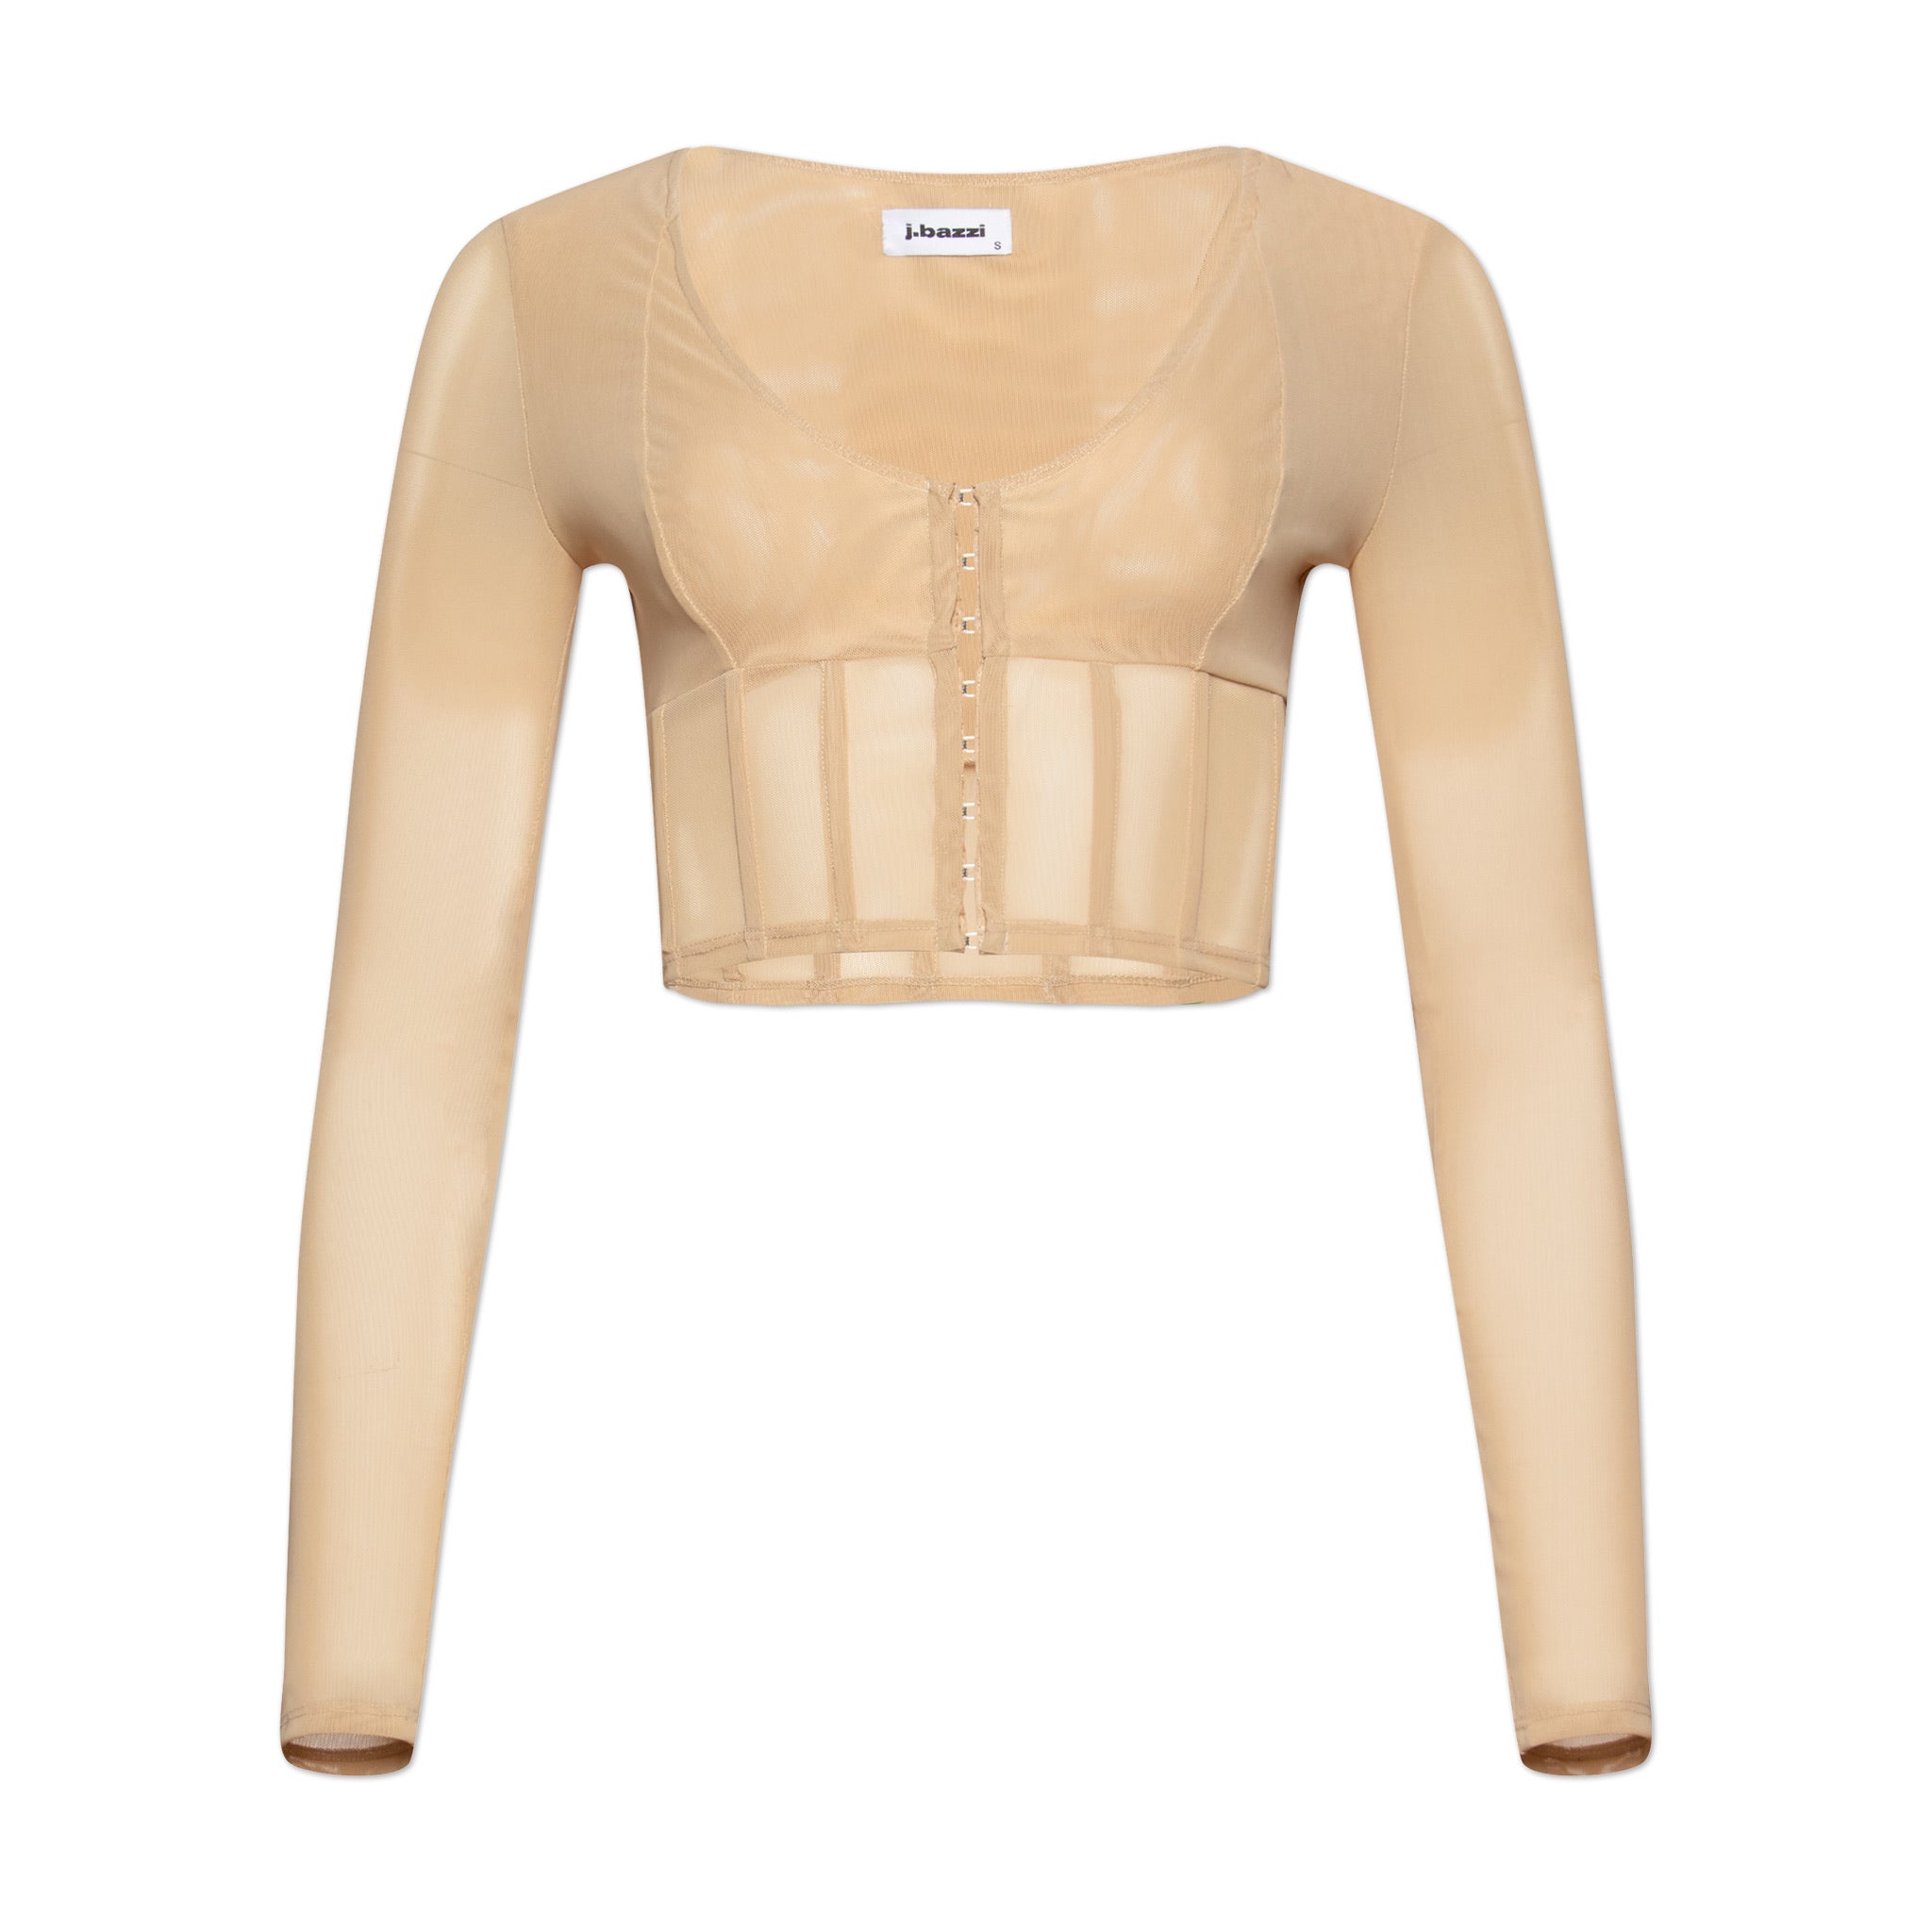 Metal Mesh Top, Shop The Largest Collection